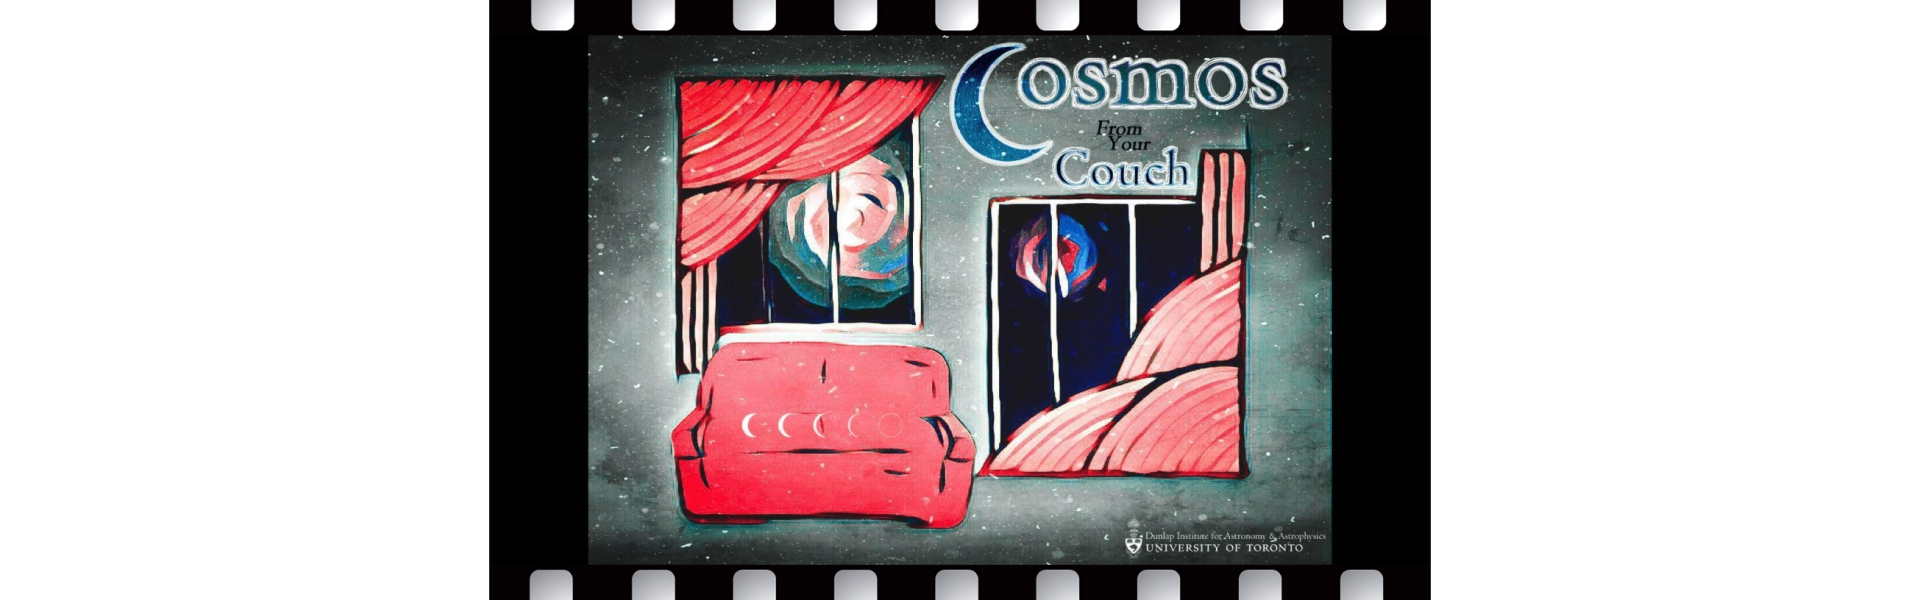 Cosmos From Your Couch